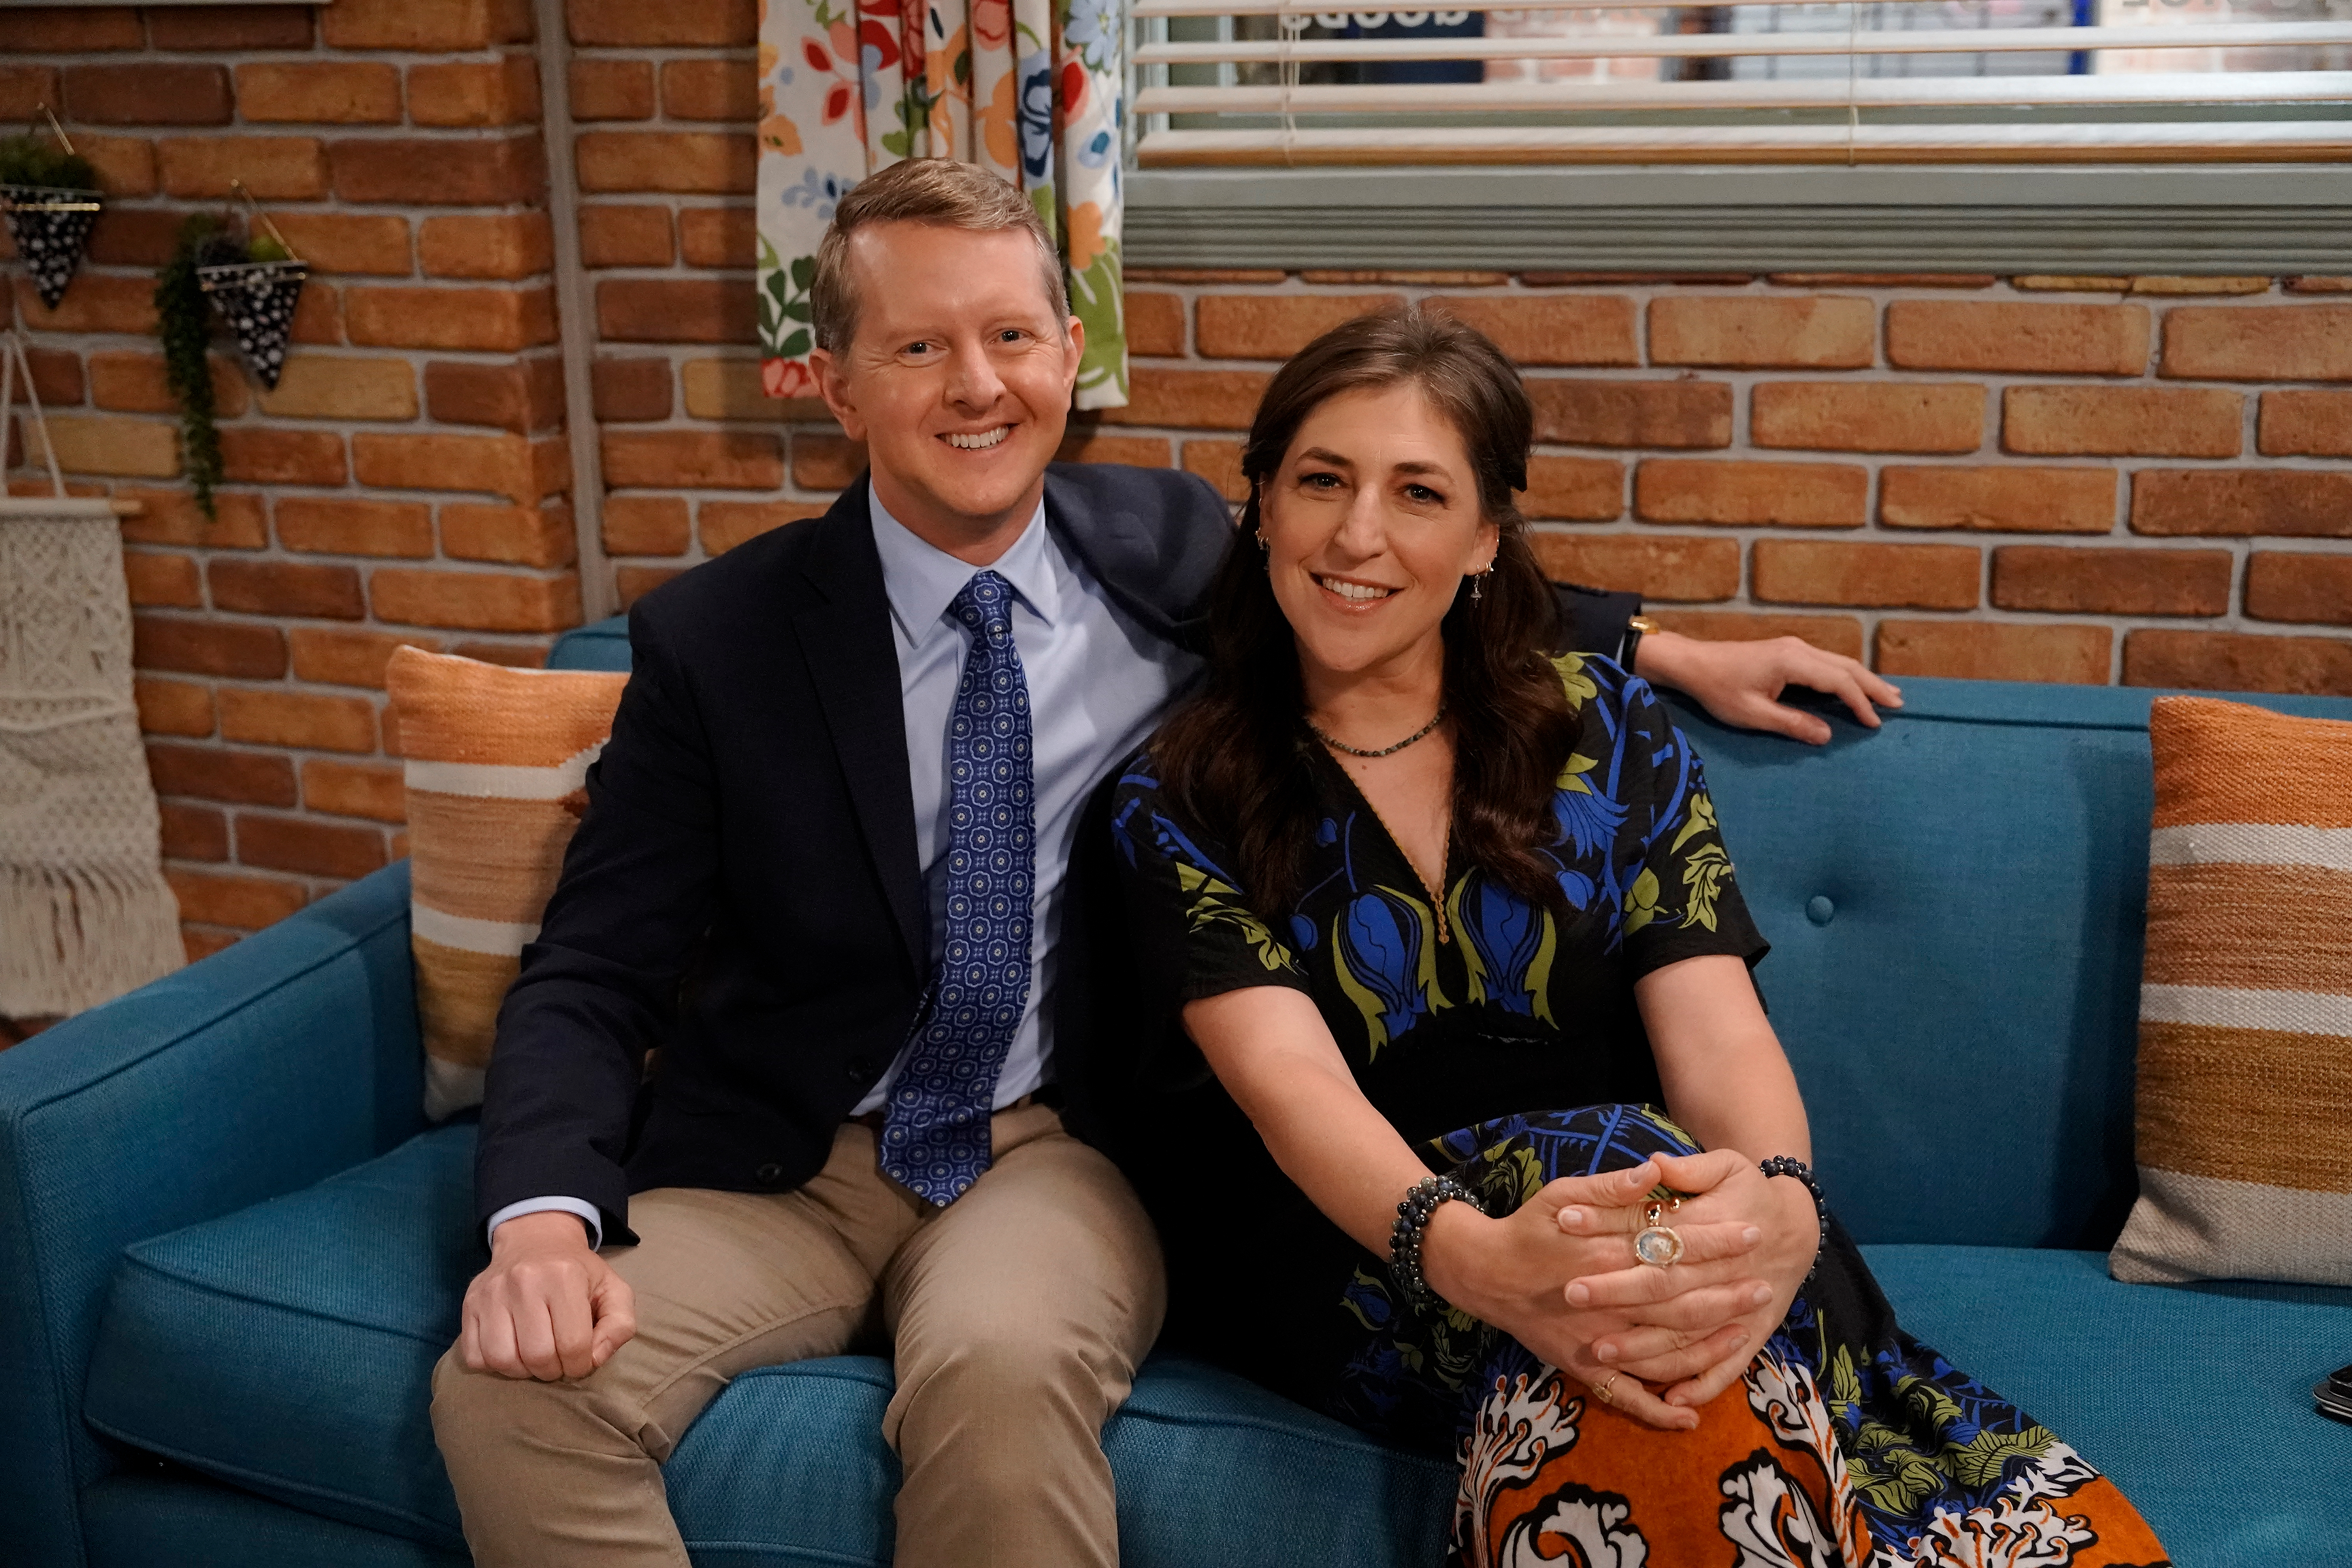 Both Ken and Mayim made $4million yearly for their work on the franchise